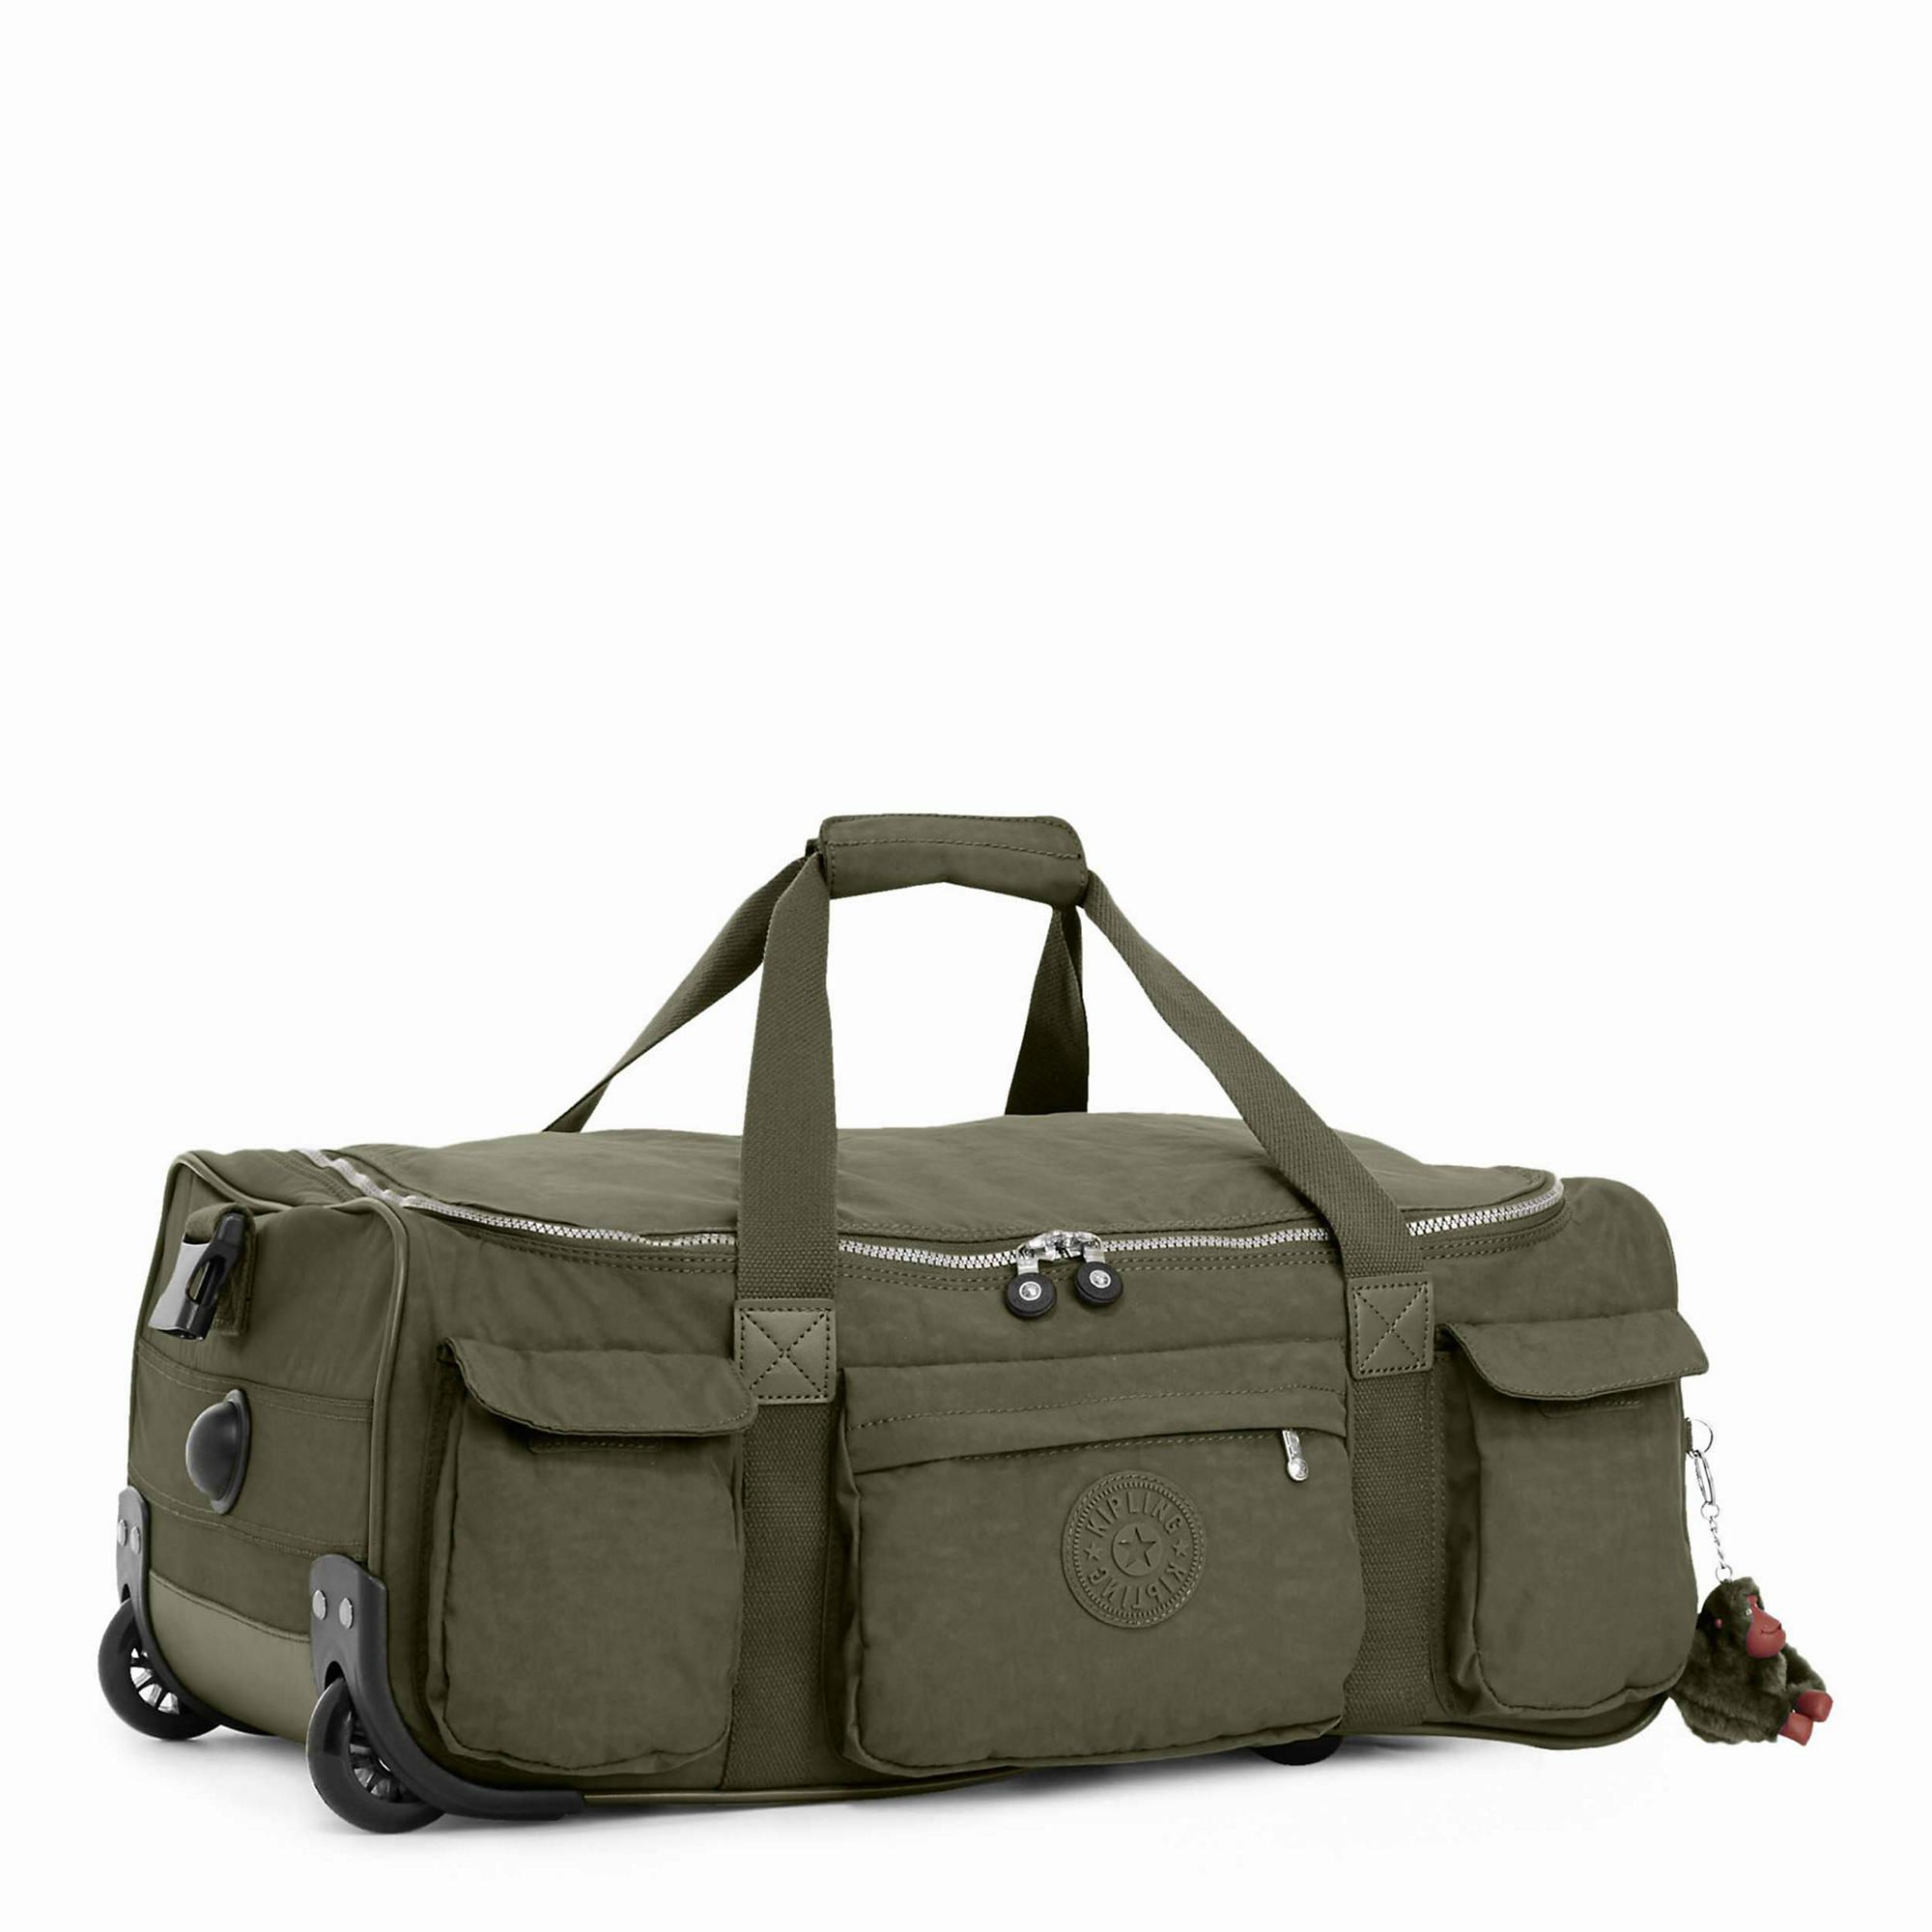 carry on duffel bag with wheels